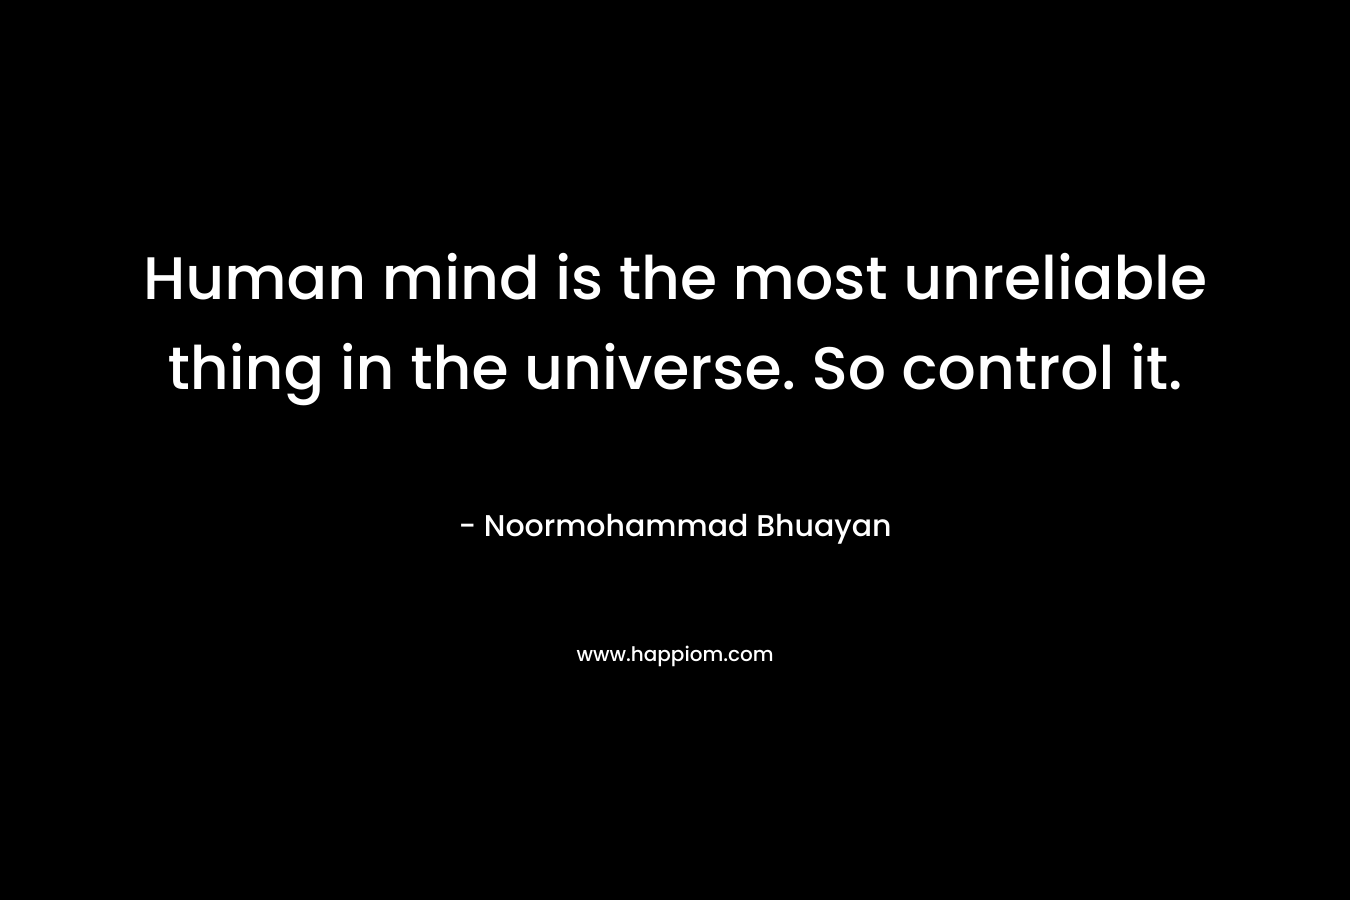 Human mind is the most unreliable thing in the universe. So control it. – Noormohammad Bhuayan